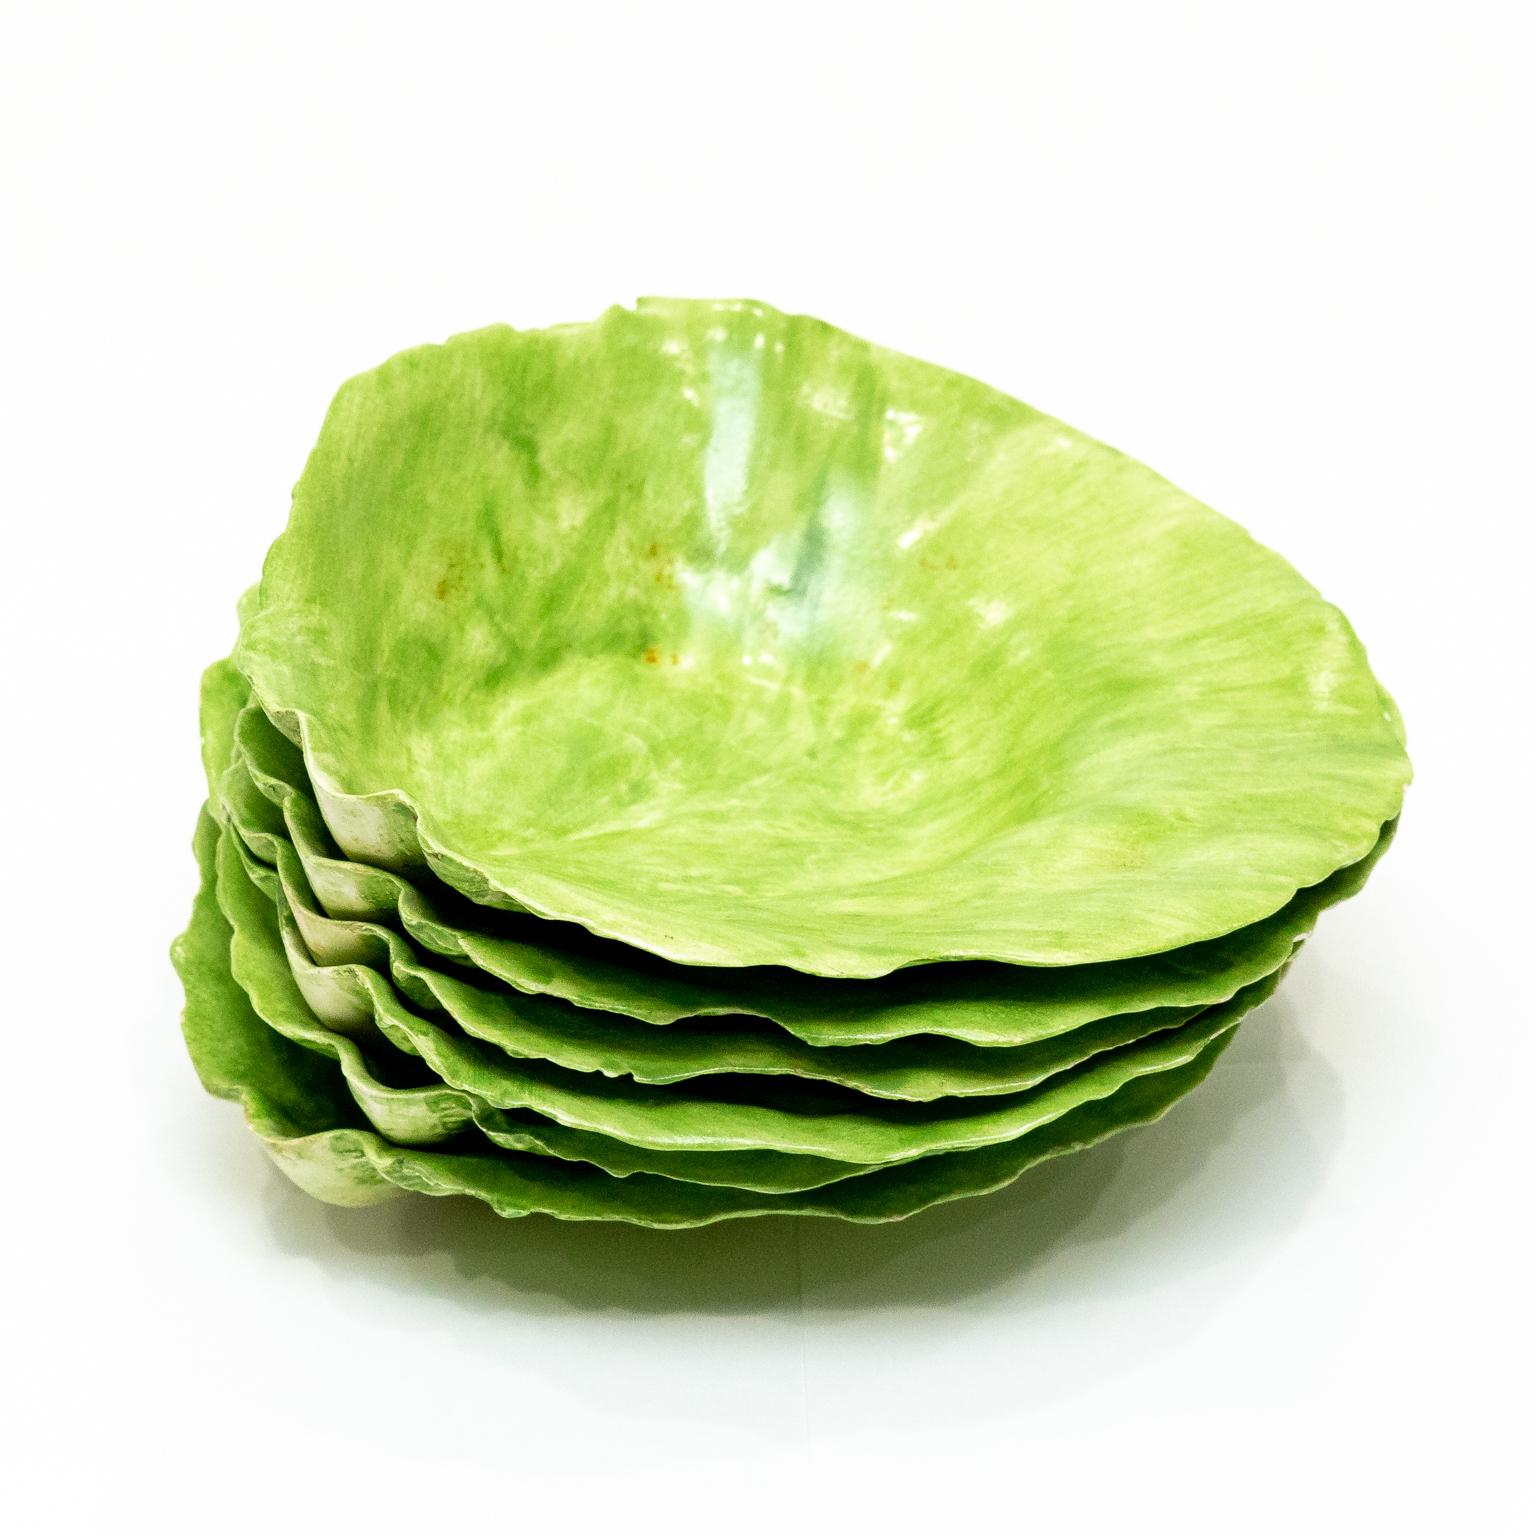 Circa 1970s set of six painted lettuceware or cabbage leaf-shaped plates in the Palm Beach Regency style. Made in the United States. Please note of wear consistent with age. One dish has a very fine pin paint chip. Could have restorations but well